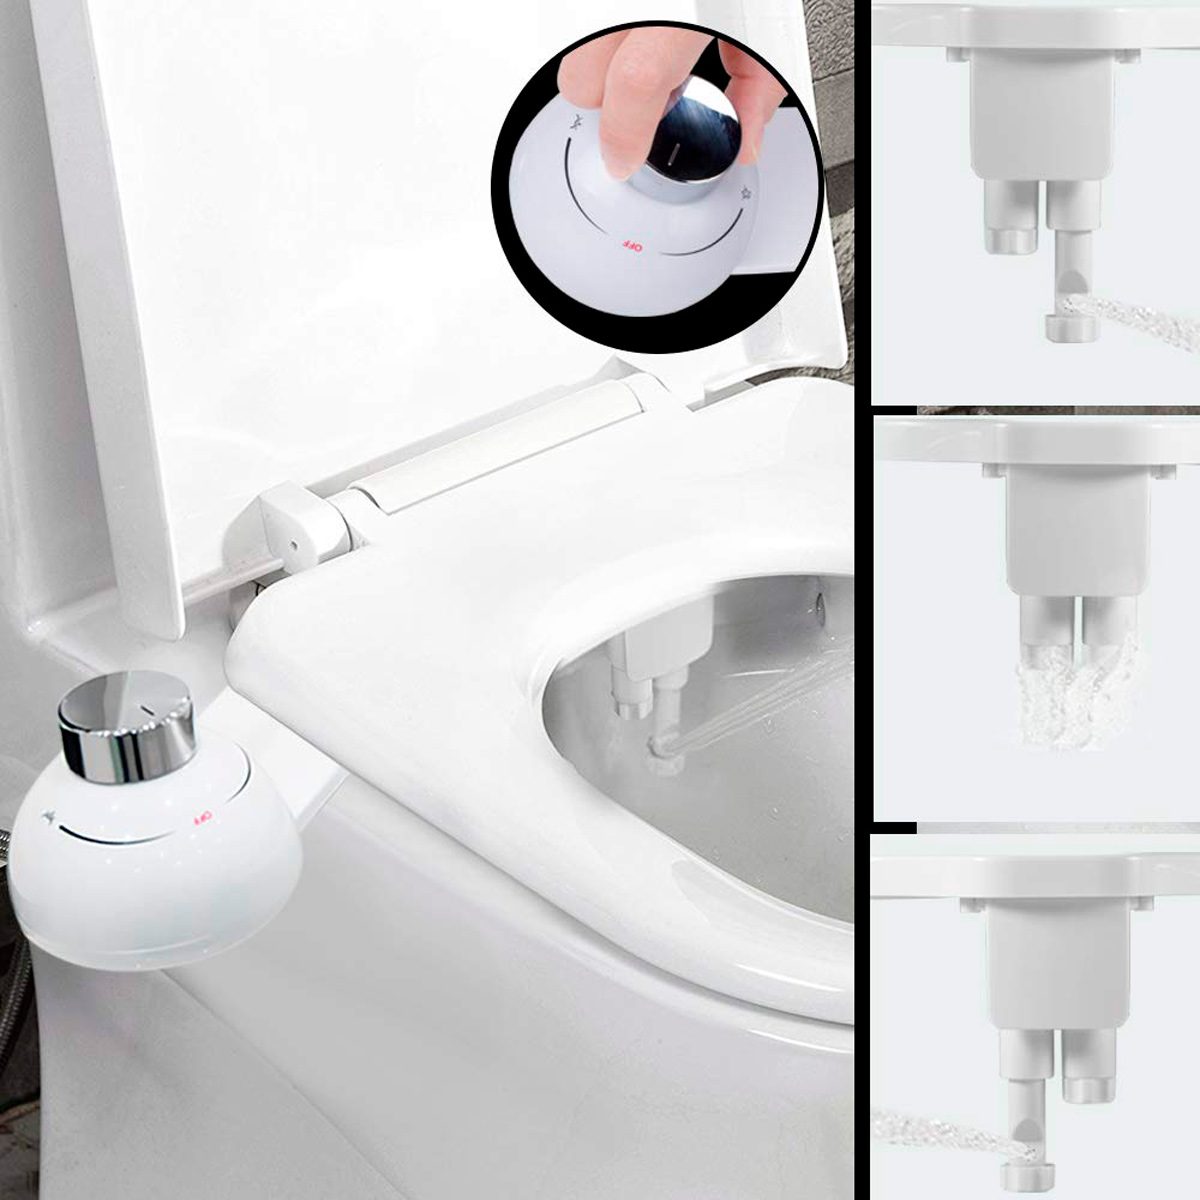 <p>Known for its ultra-slim design, this <a href="https://www.amazon.com/dp/B07N66M45S/?tag=fhm_msn-20" rel="nofollow noopener noreferrer">bidet attachment</a> is so thin it leaves no toilet seat gap like some other models. It has a chrome-plated water pressure control so you can easily adjust the pressure. "It has cleaning dual nozzle. It's very useful for men and women," says one buyer. Plus, <a href="https://www.familyhandyman.com/article/best-toilet-paper-for-plumbing/">this is the best toilet paper for your plumbing</a>.</p> <p class="listicle-page__cta-button-shop"><a class="shop-btn" href="https://www.amazon.com/dp/B07N66M45S/?tag=fhm_msn-20">Shop Now</a></p>